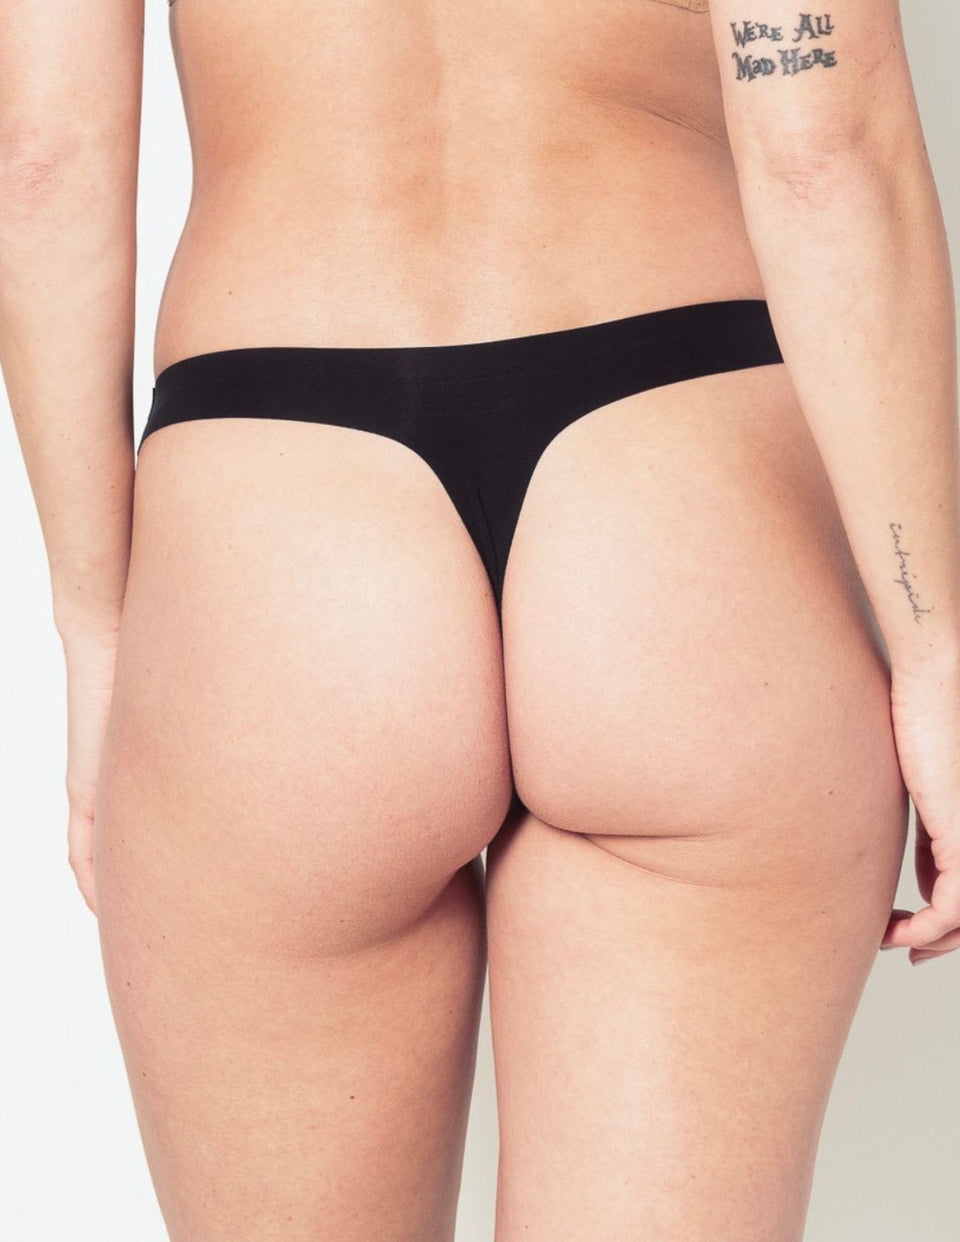 Black invisible G-string